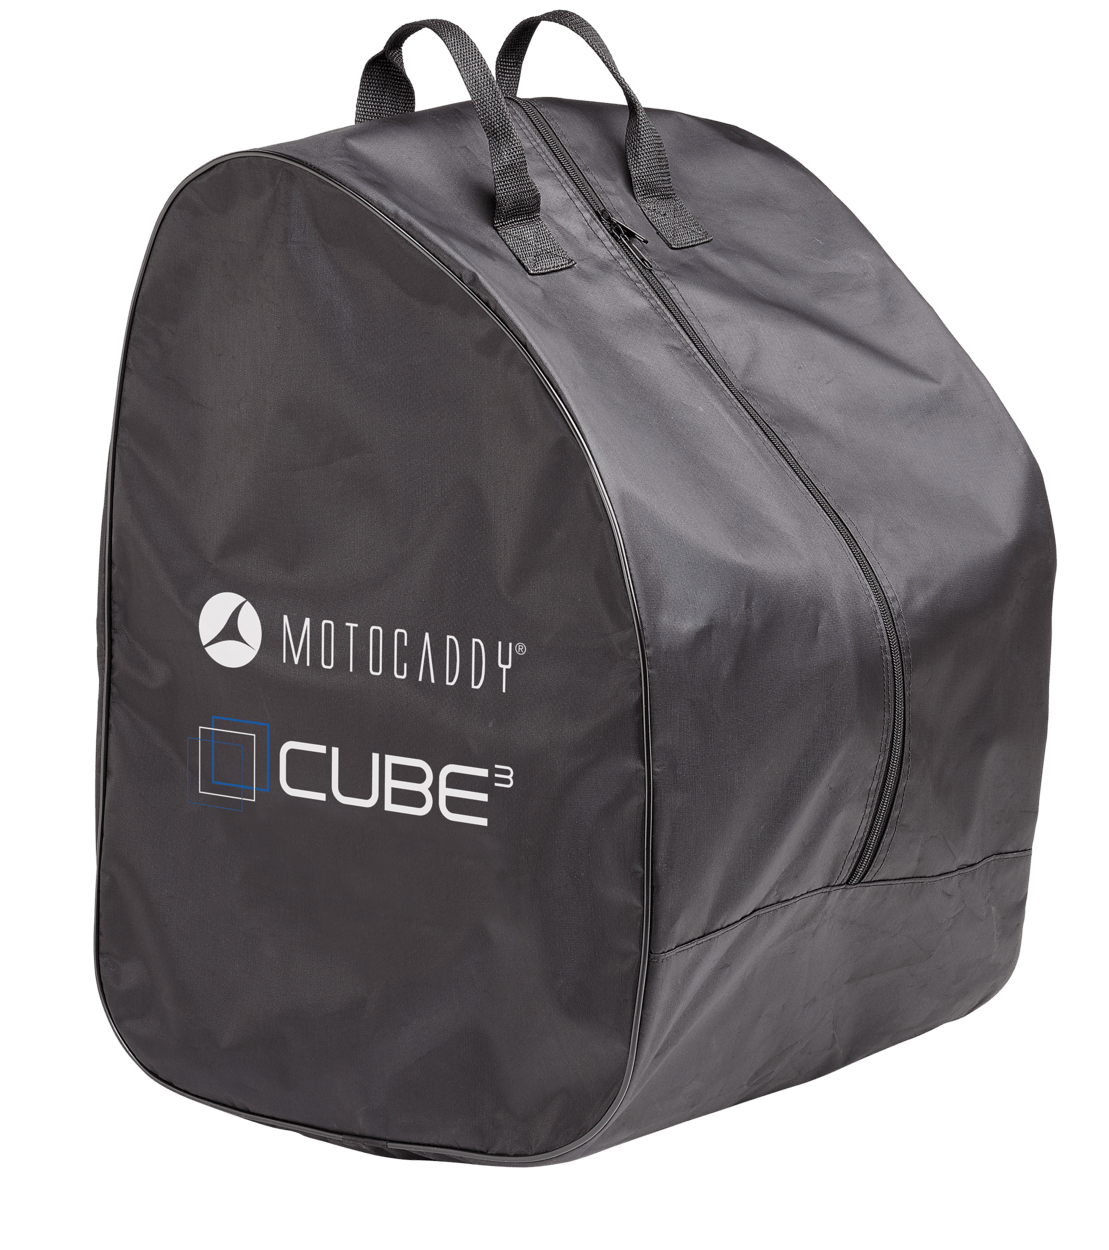 'CUBE' TROLLEY TRAVEL COVER - 2021